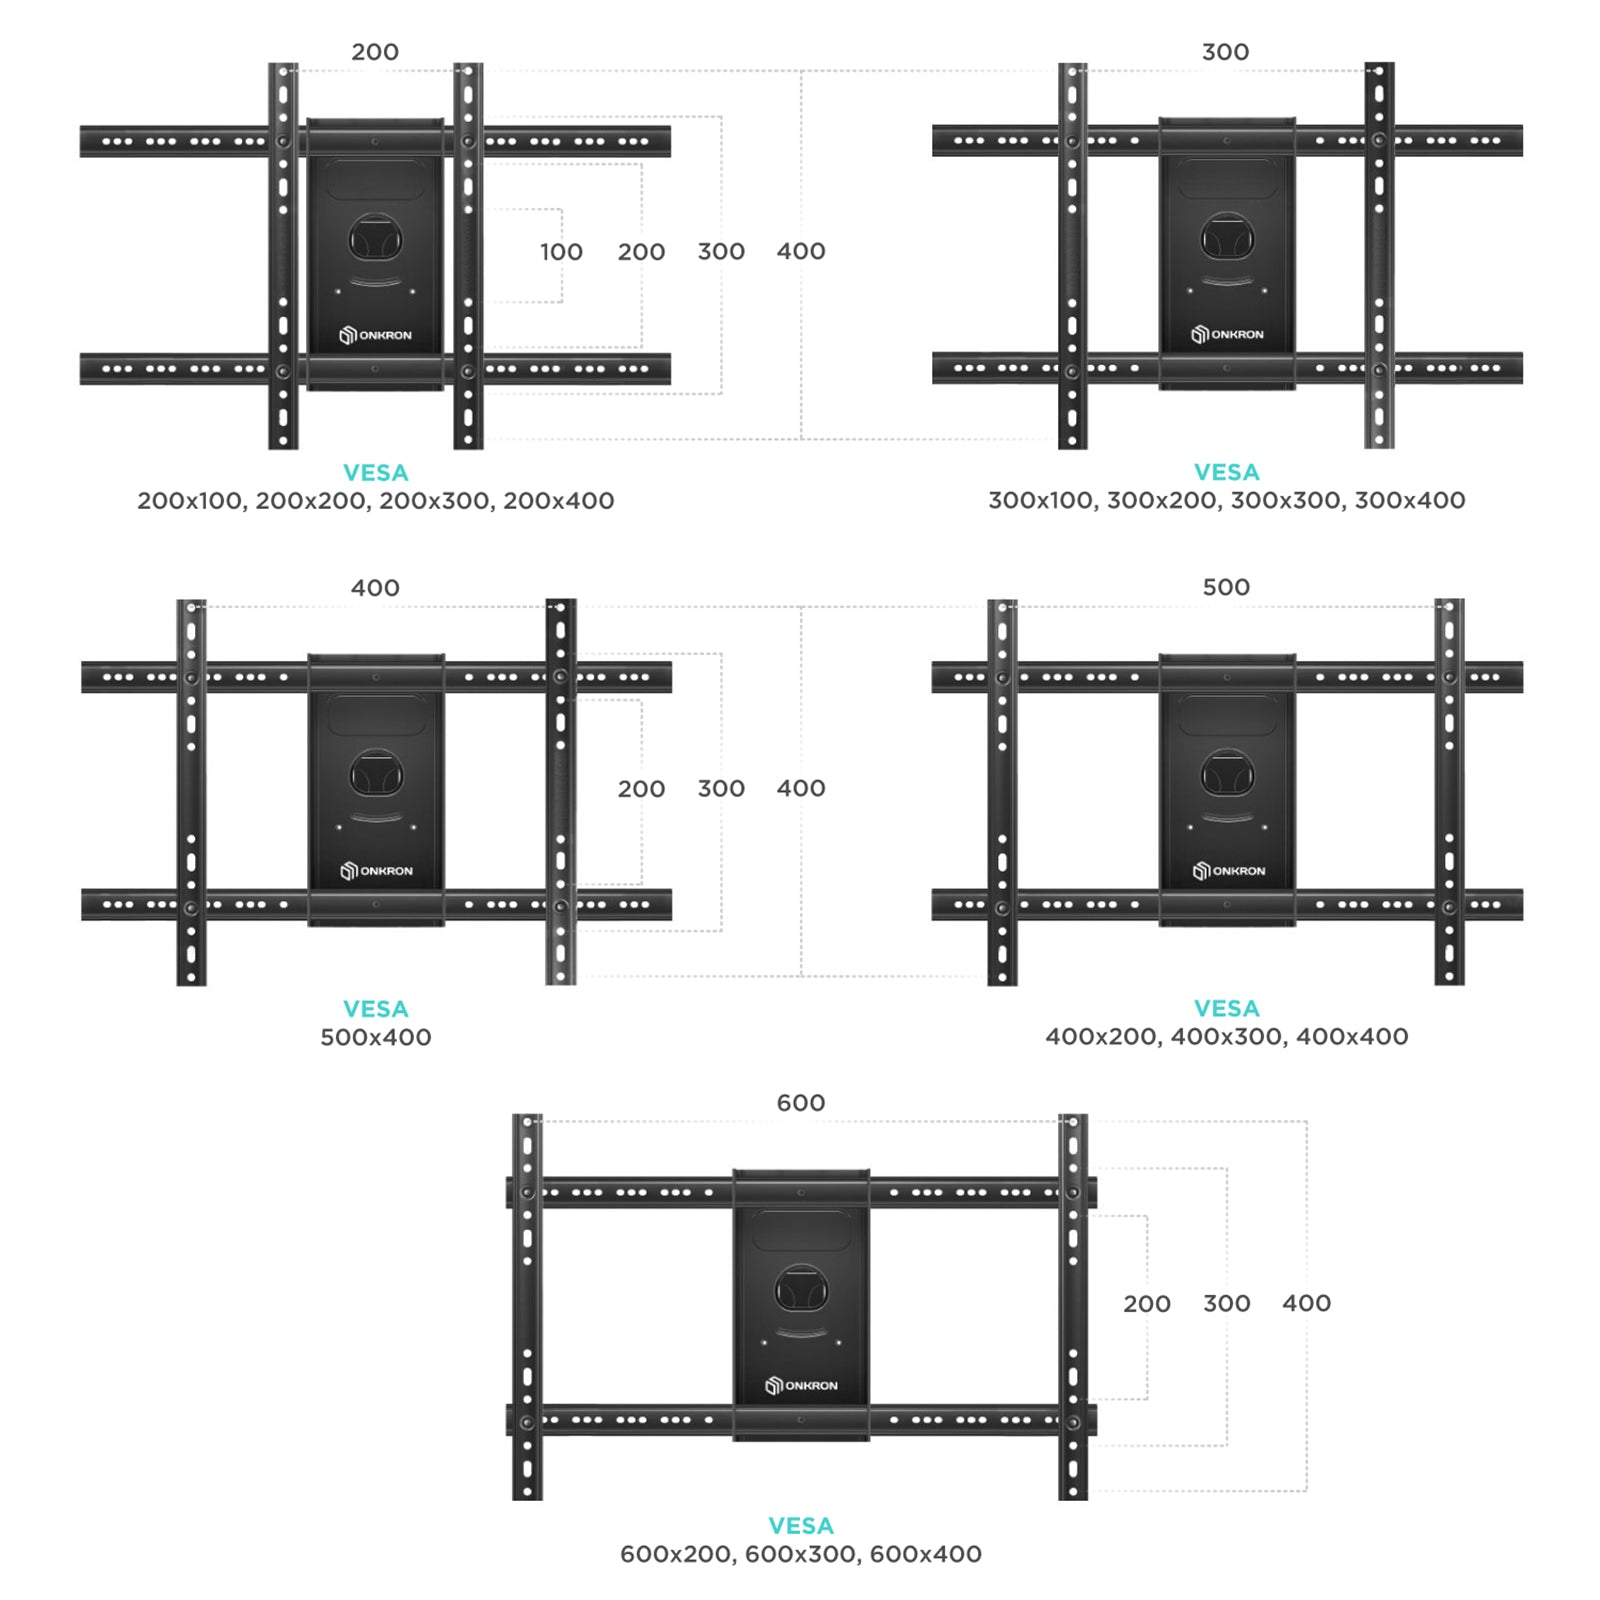 Full Motion TV Wall Mount for 42" to 70-inch Screens up to 100 lbs ONKRON M6L, Black